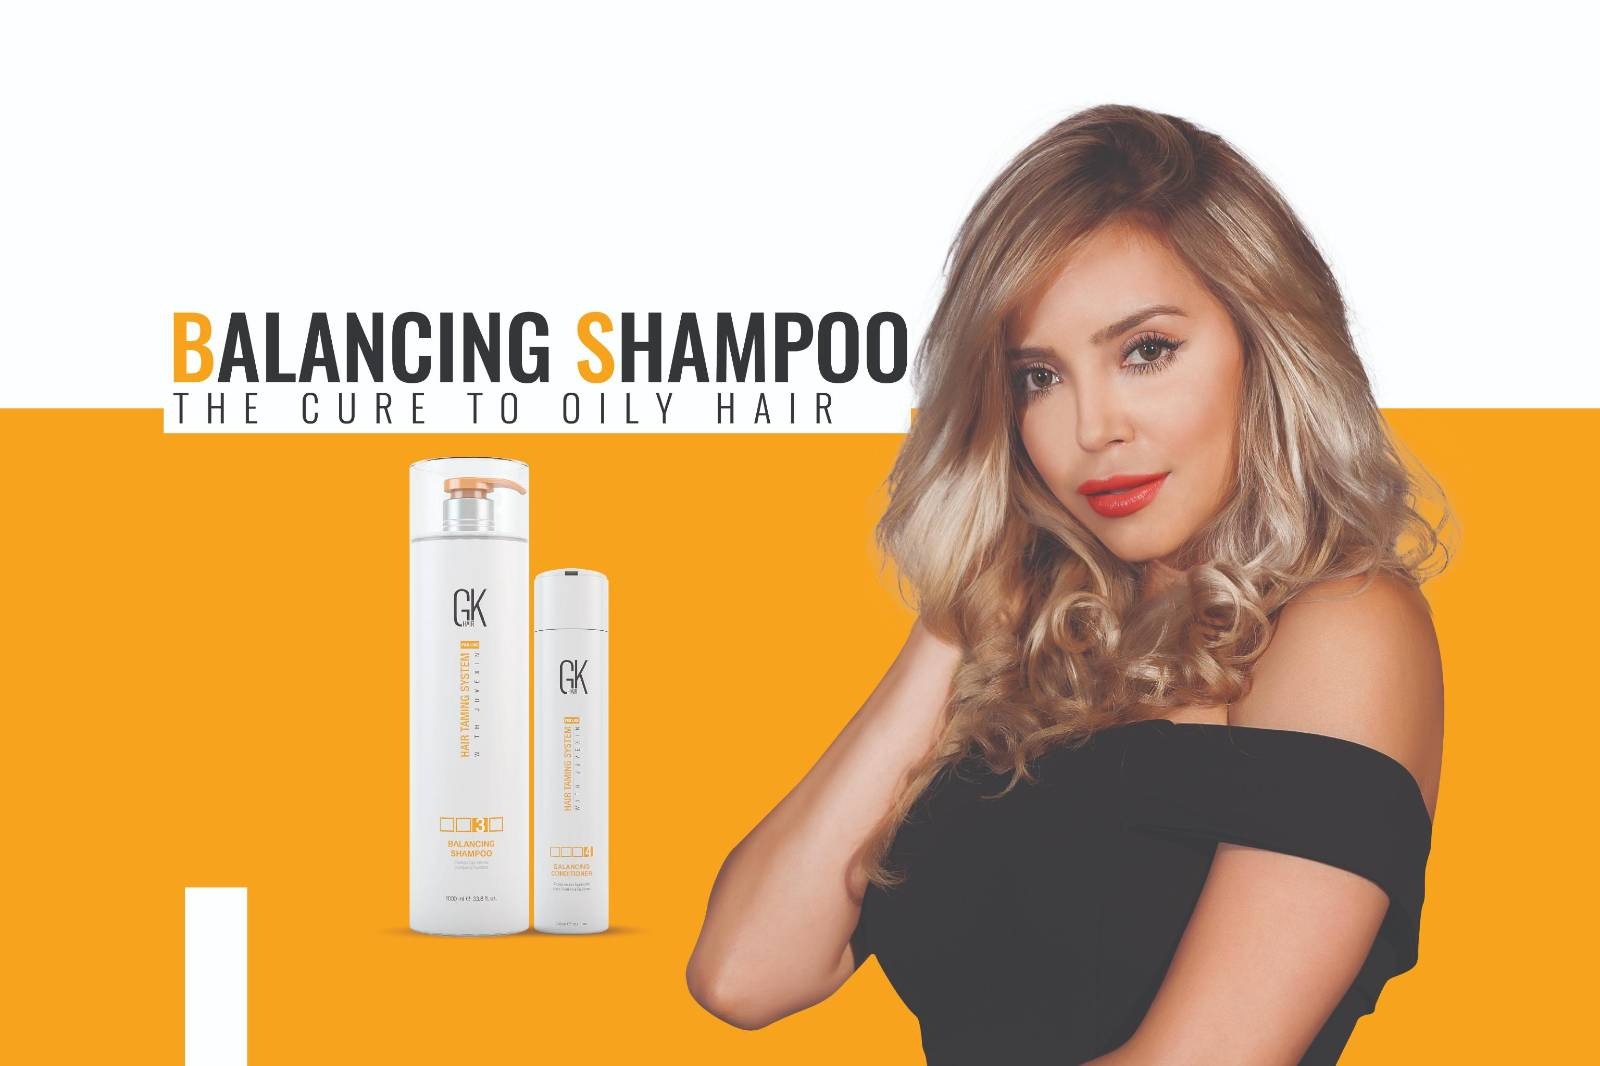 Balancing Shampoo: The Cure To Oily Hair 